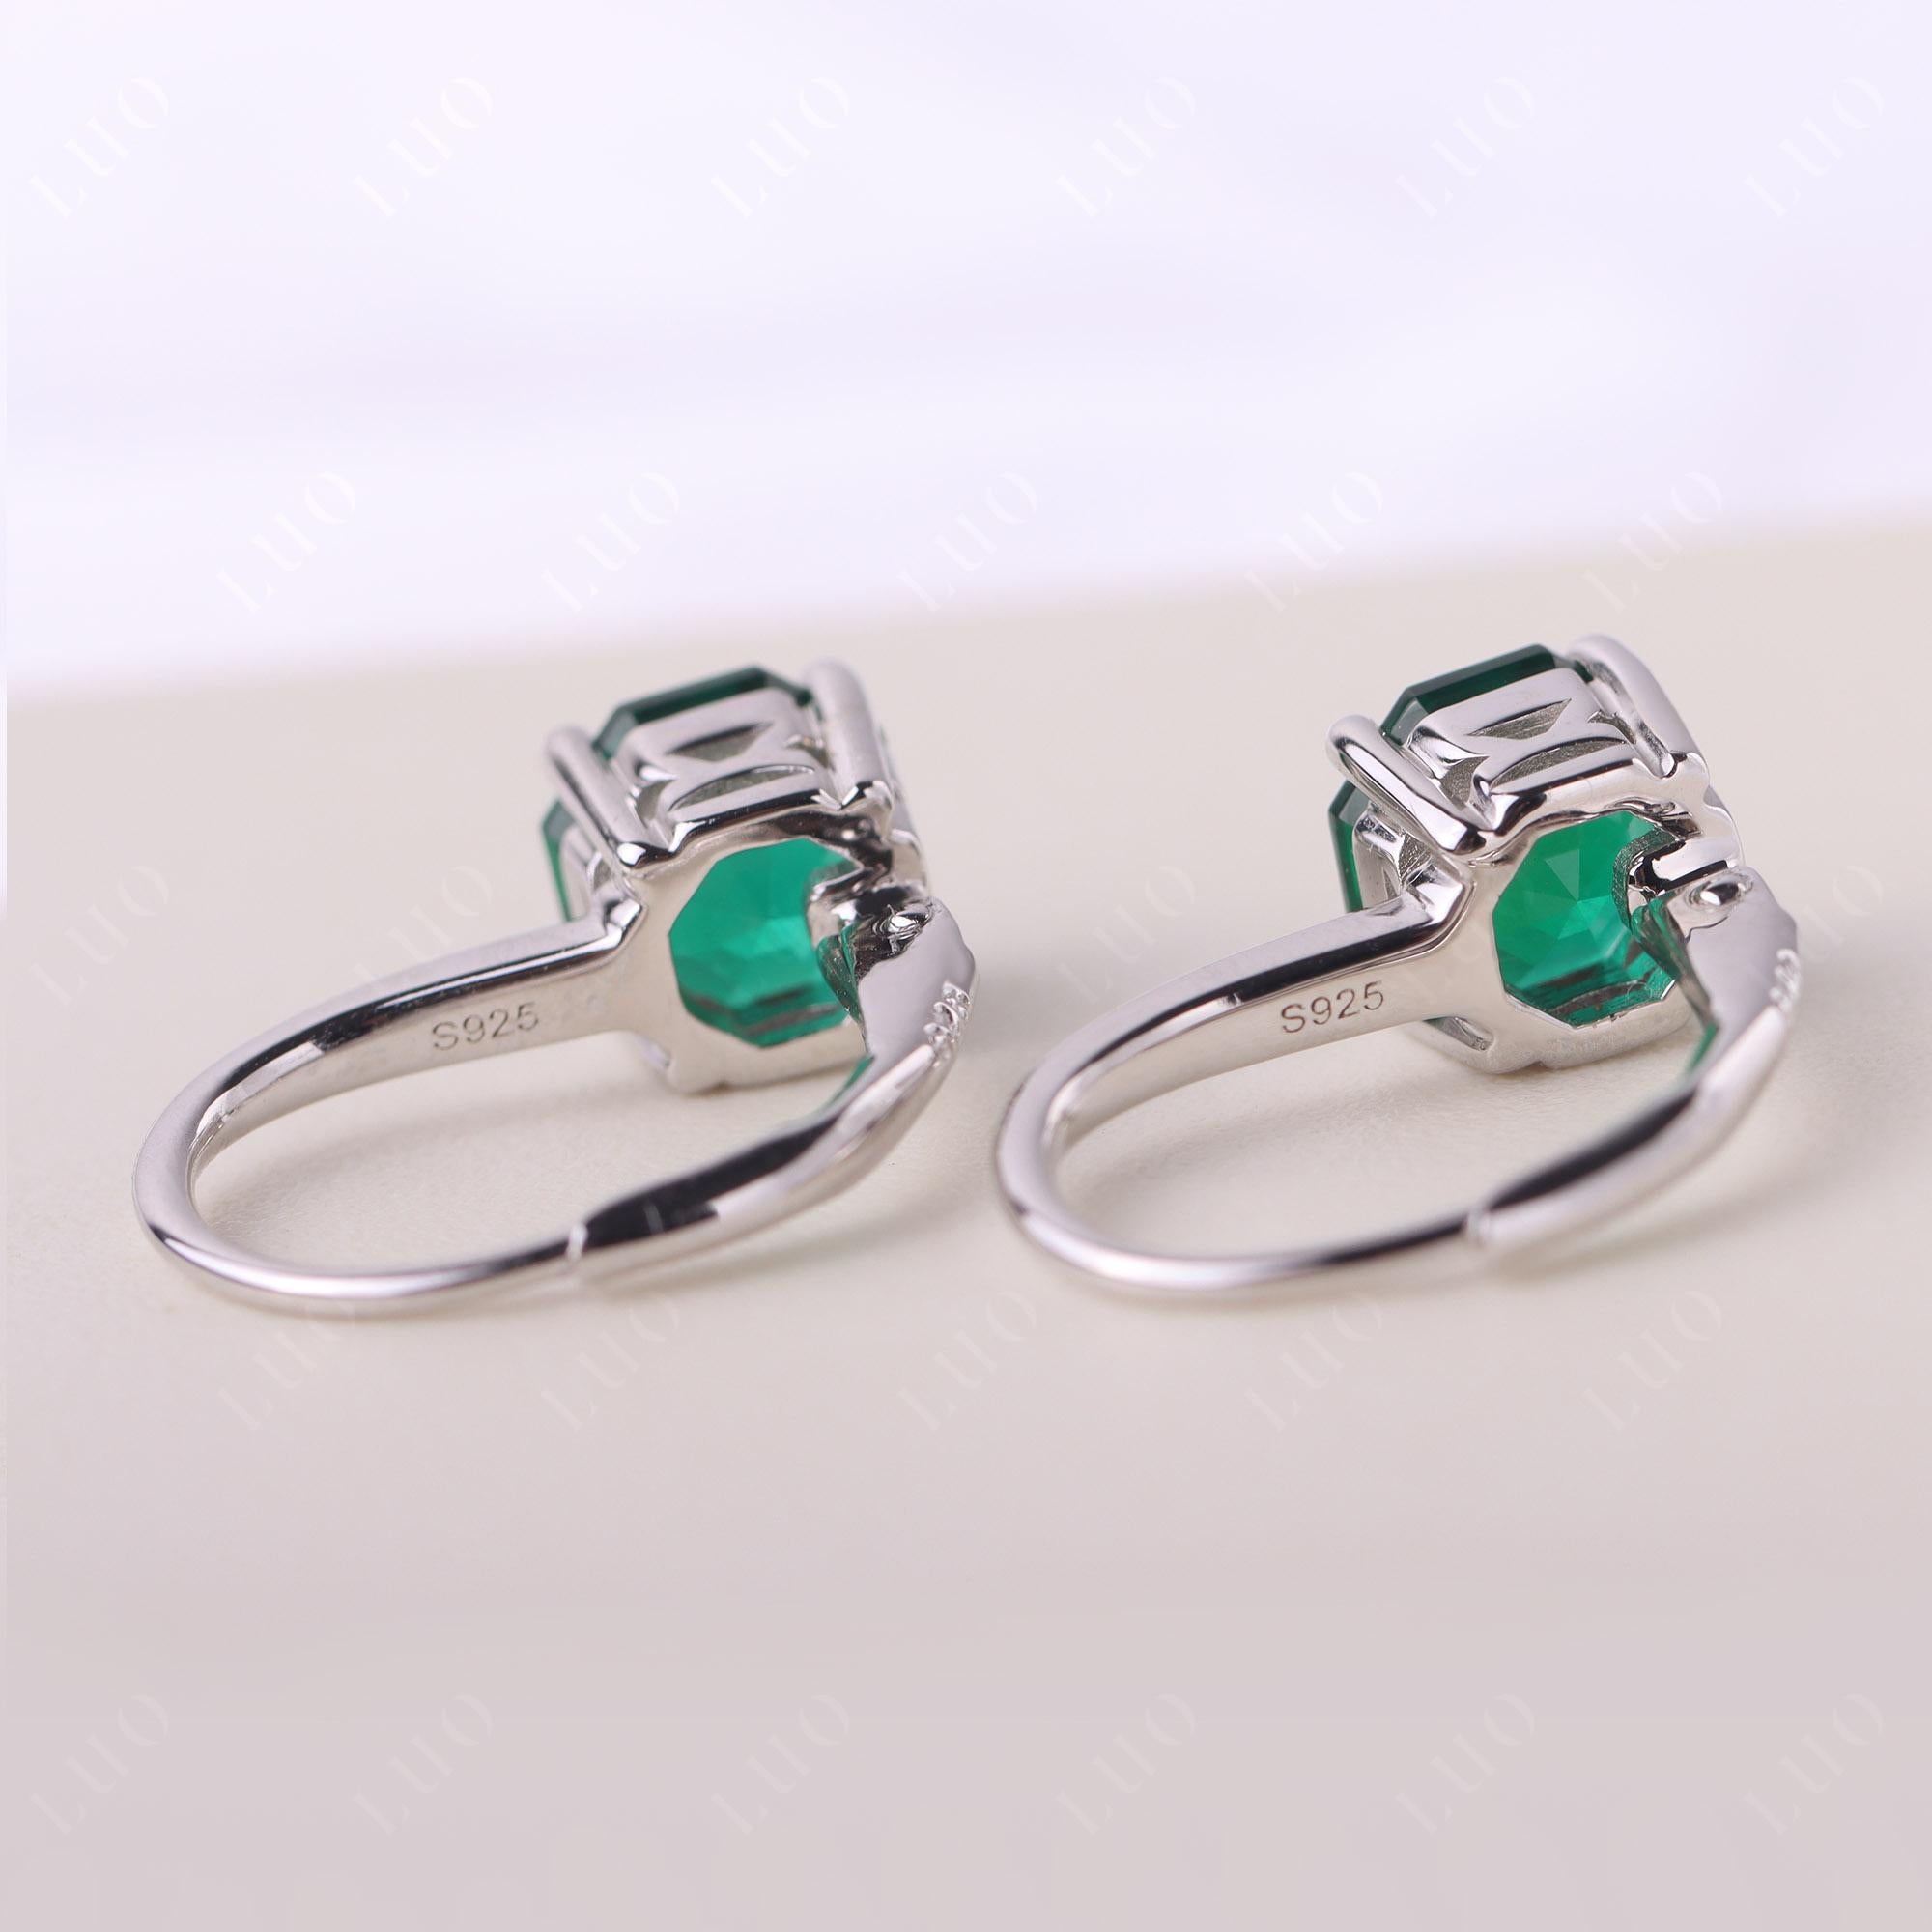 Octagon Cut Lab Created Emerald Leverback Earrings - LUO Jewelry